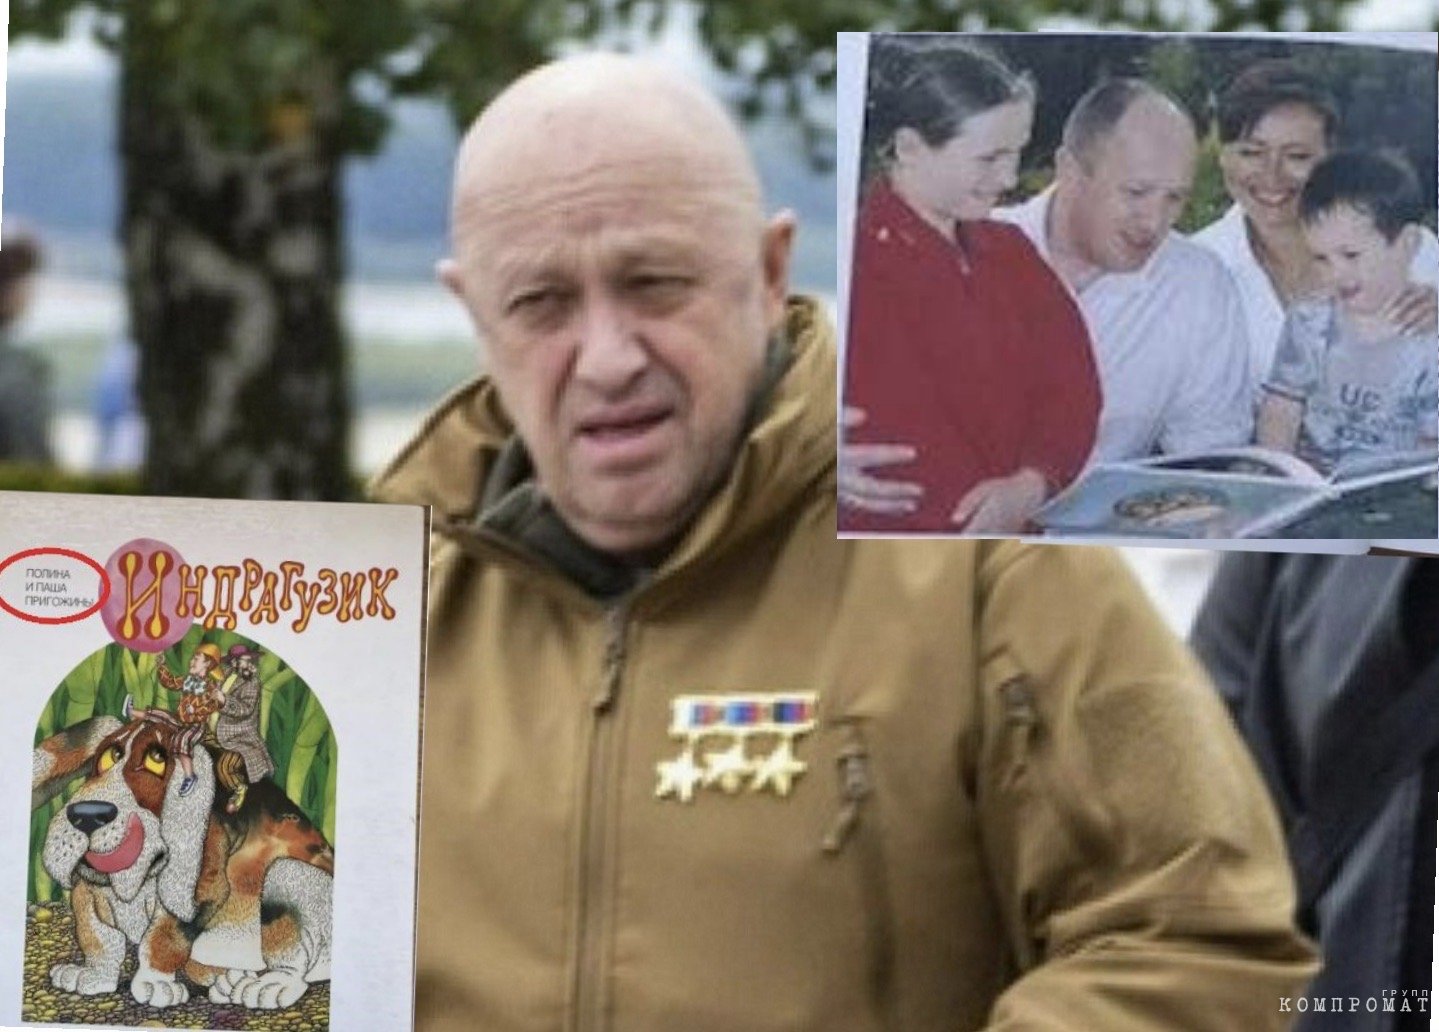 Evgeny Prigozhin, the real author of Indraguzikov, and a family photo from the book